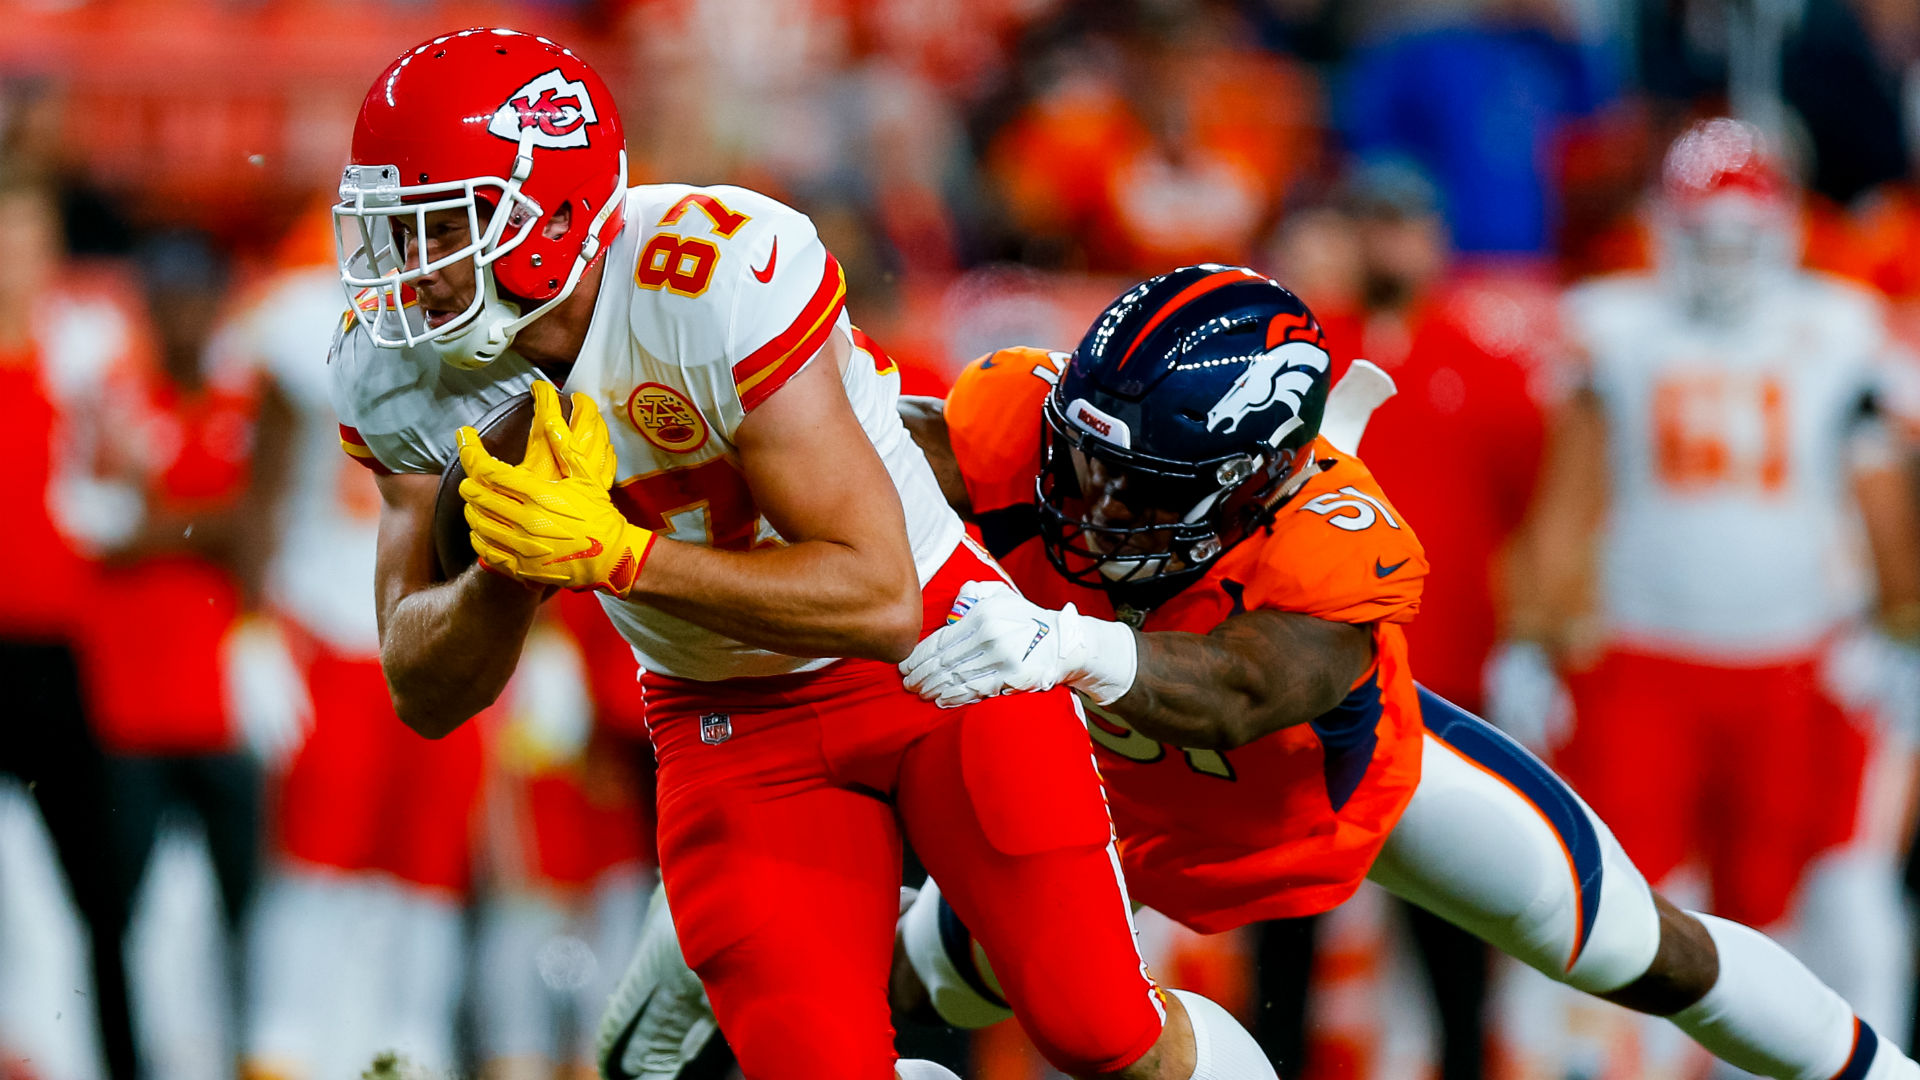 Flipboard: Three takeaways from Chiefs' road win over the Broncos